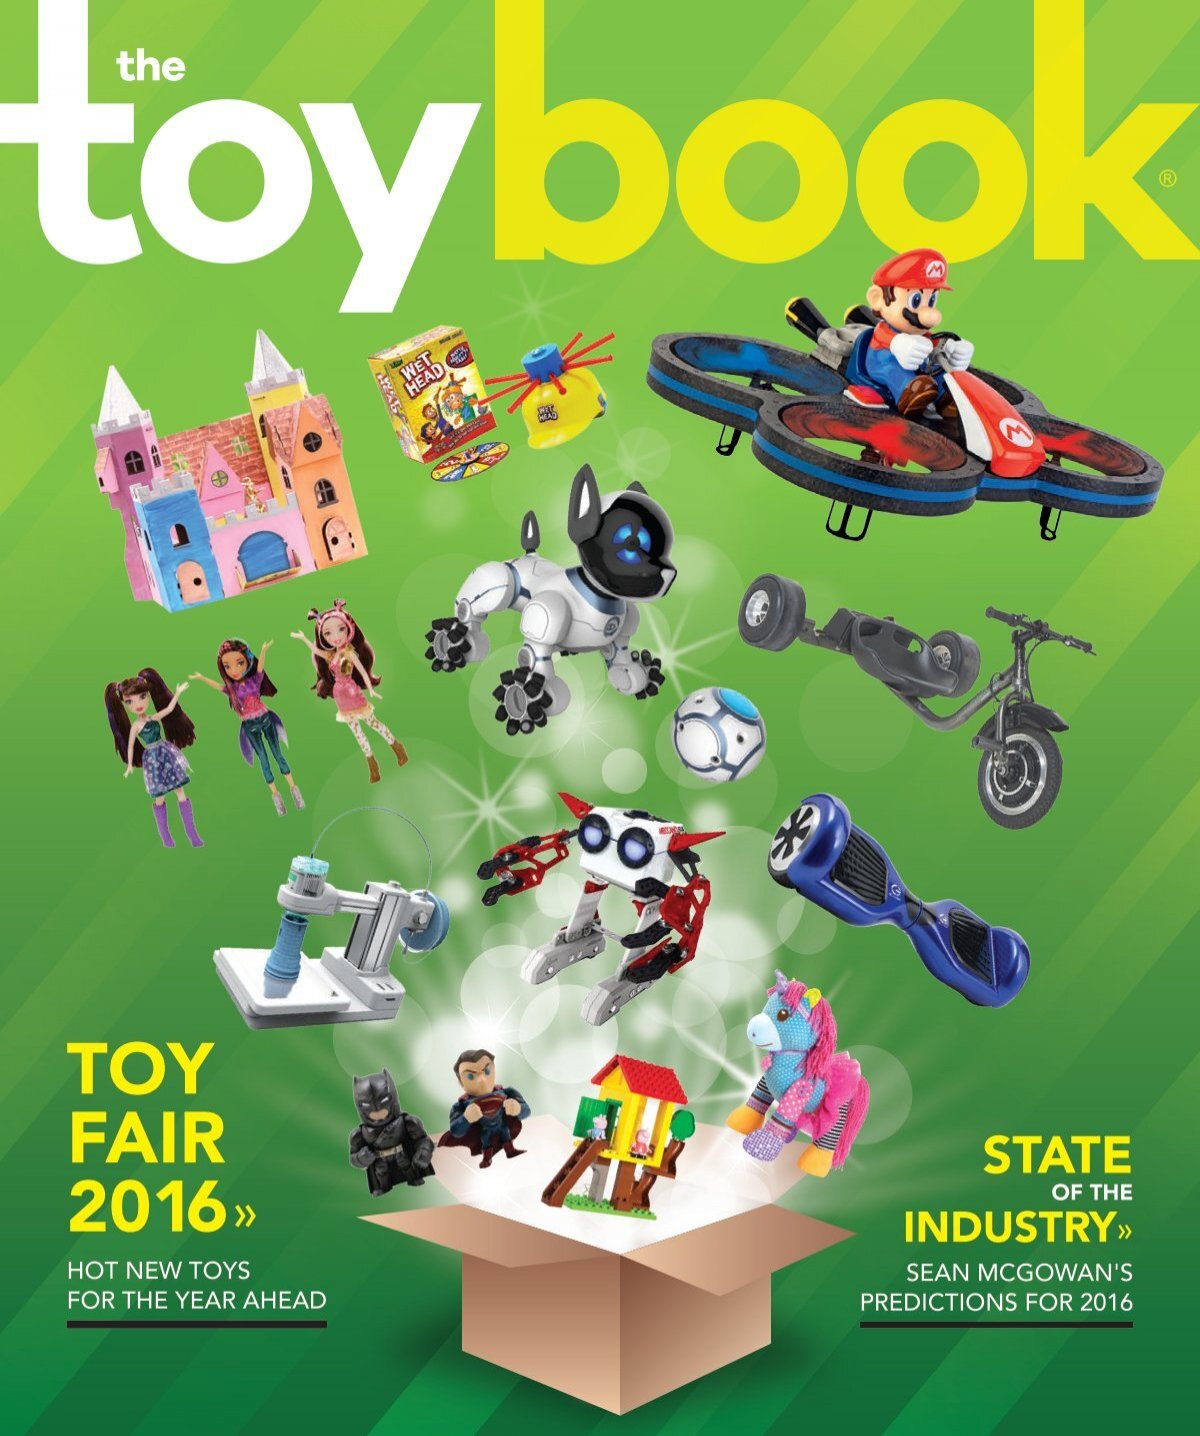 The Toy Book - 2016 NY TOY FAIR EDITION